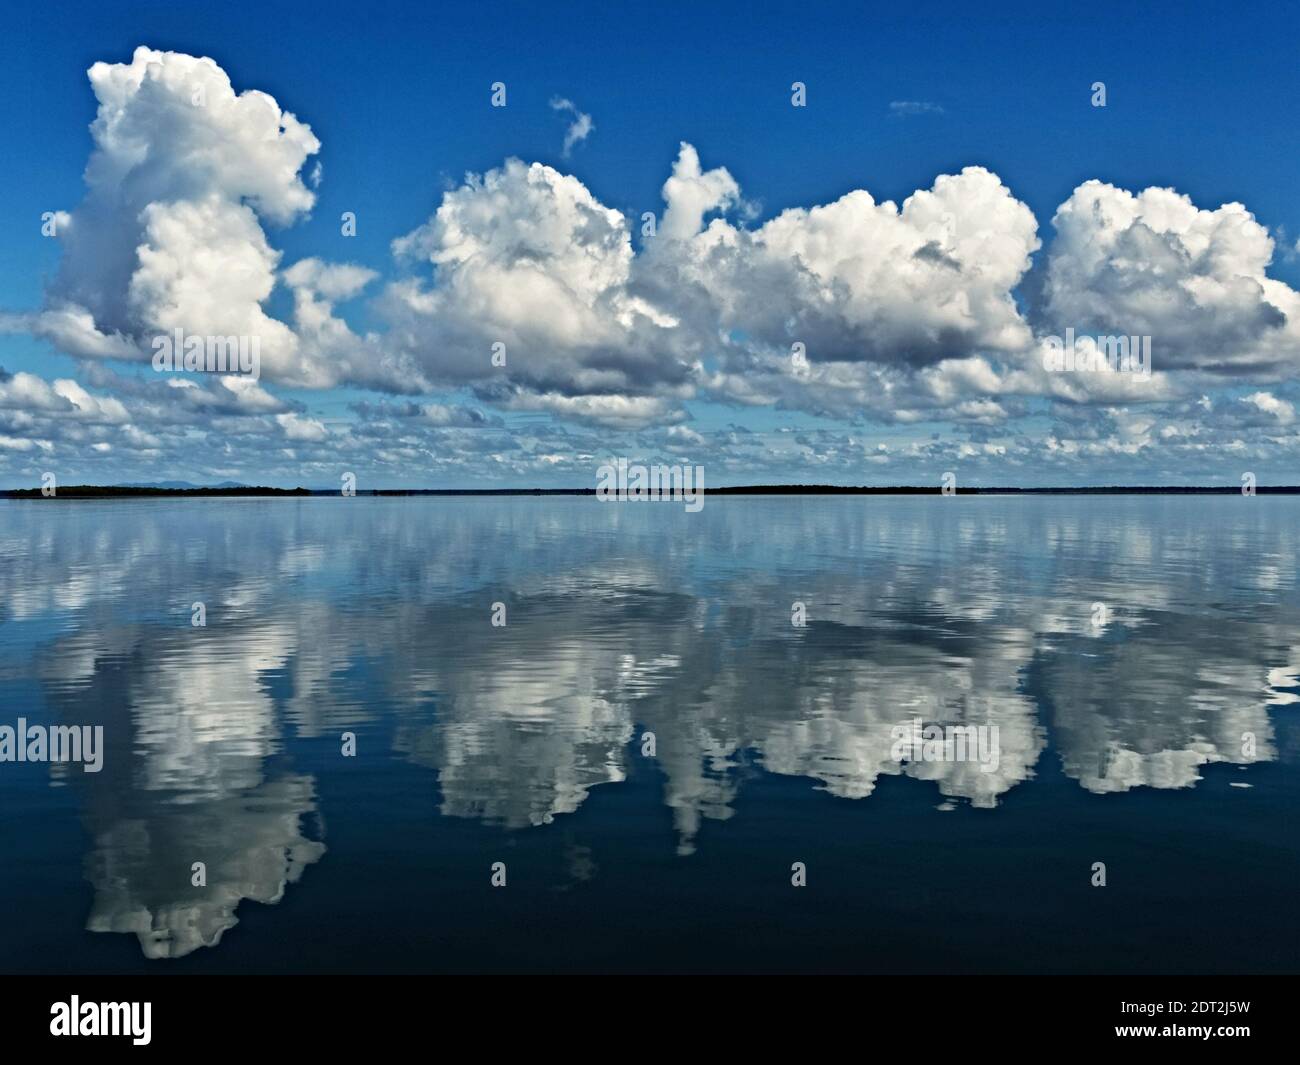 This very crisp colorful cloud scene with blue  sky and water reflections was captured in the sea between Fraser Island and the Australian mainland.    cloud, clouds, reflections, water, sea, ocean, panorama, cloudy, scene, scenic, view, bright clouds, blue sky, coast, coastal, sky art, skyscape, colour, color, colourful, blue, white, cloudscape, daylight, sunlight, nature, air, atmosphere, weather, heaven, beauty in nature , stock image, images, royalty free photo, stock photos, stock photograph,  picture,  graphic, background, Fraser island, Queensland, Australia, Geoff Childs, sunypicsozcom Stock Photo